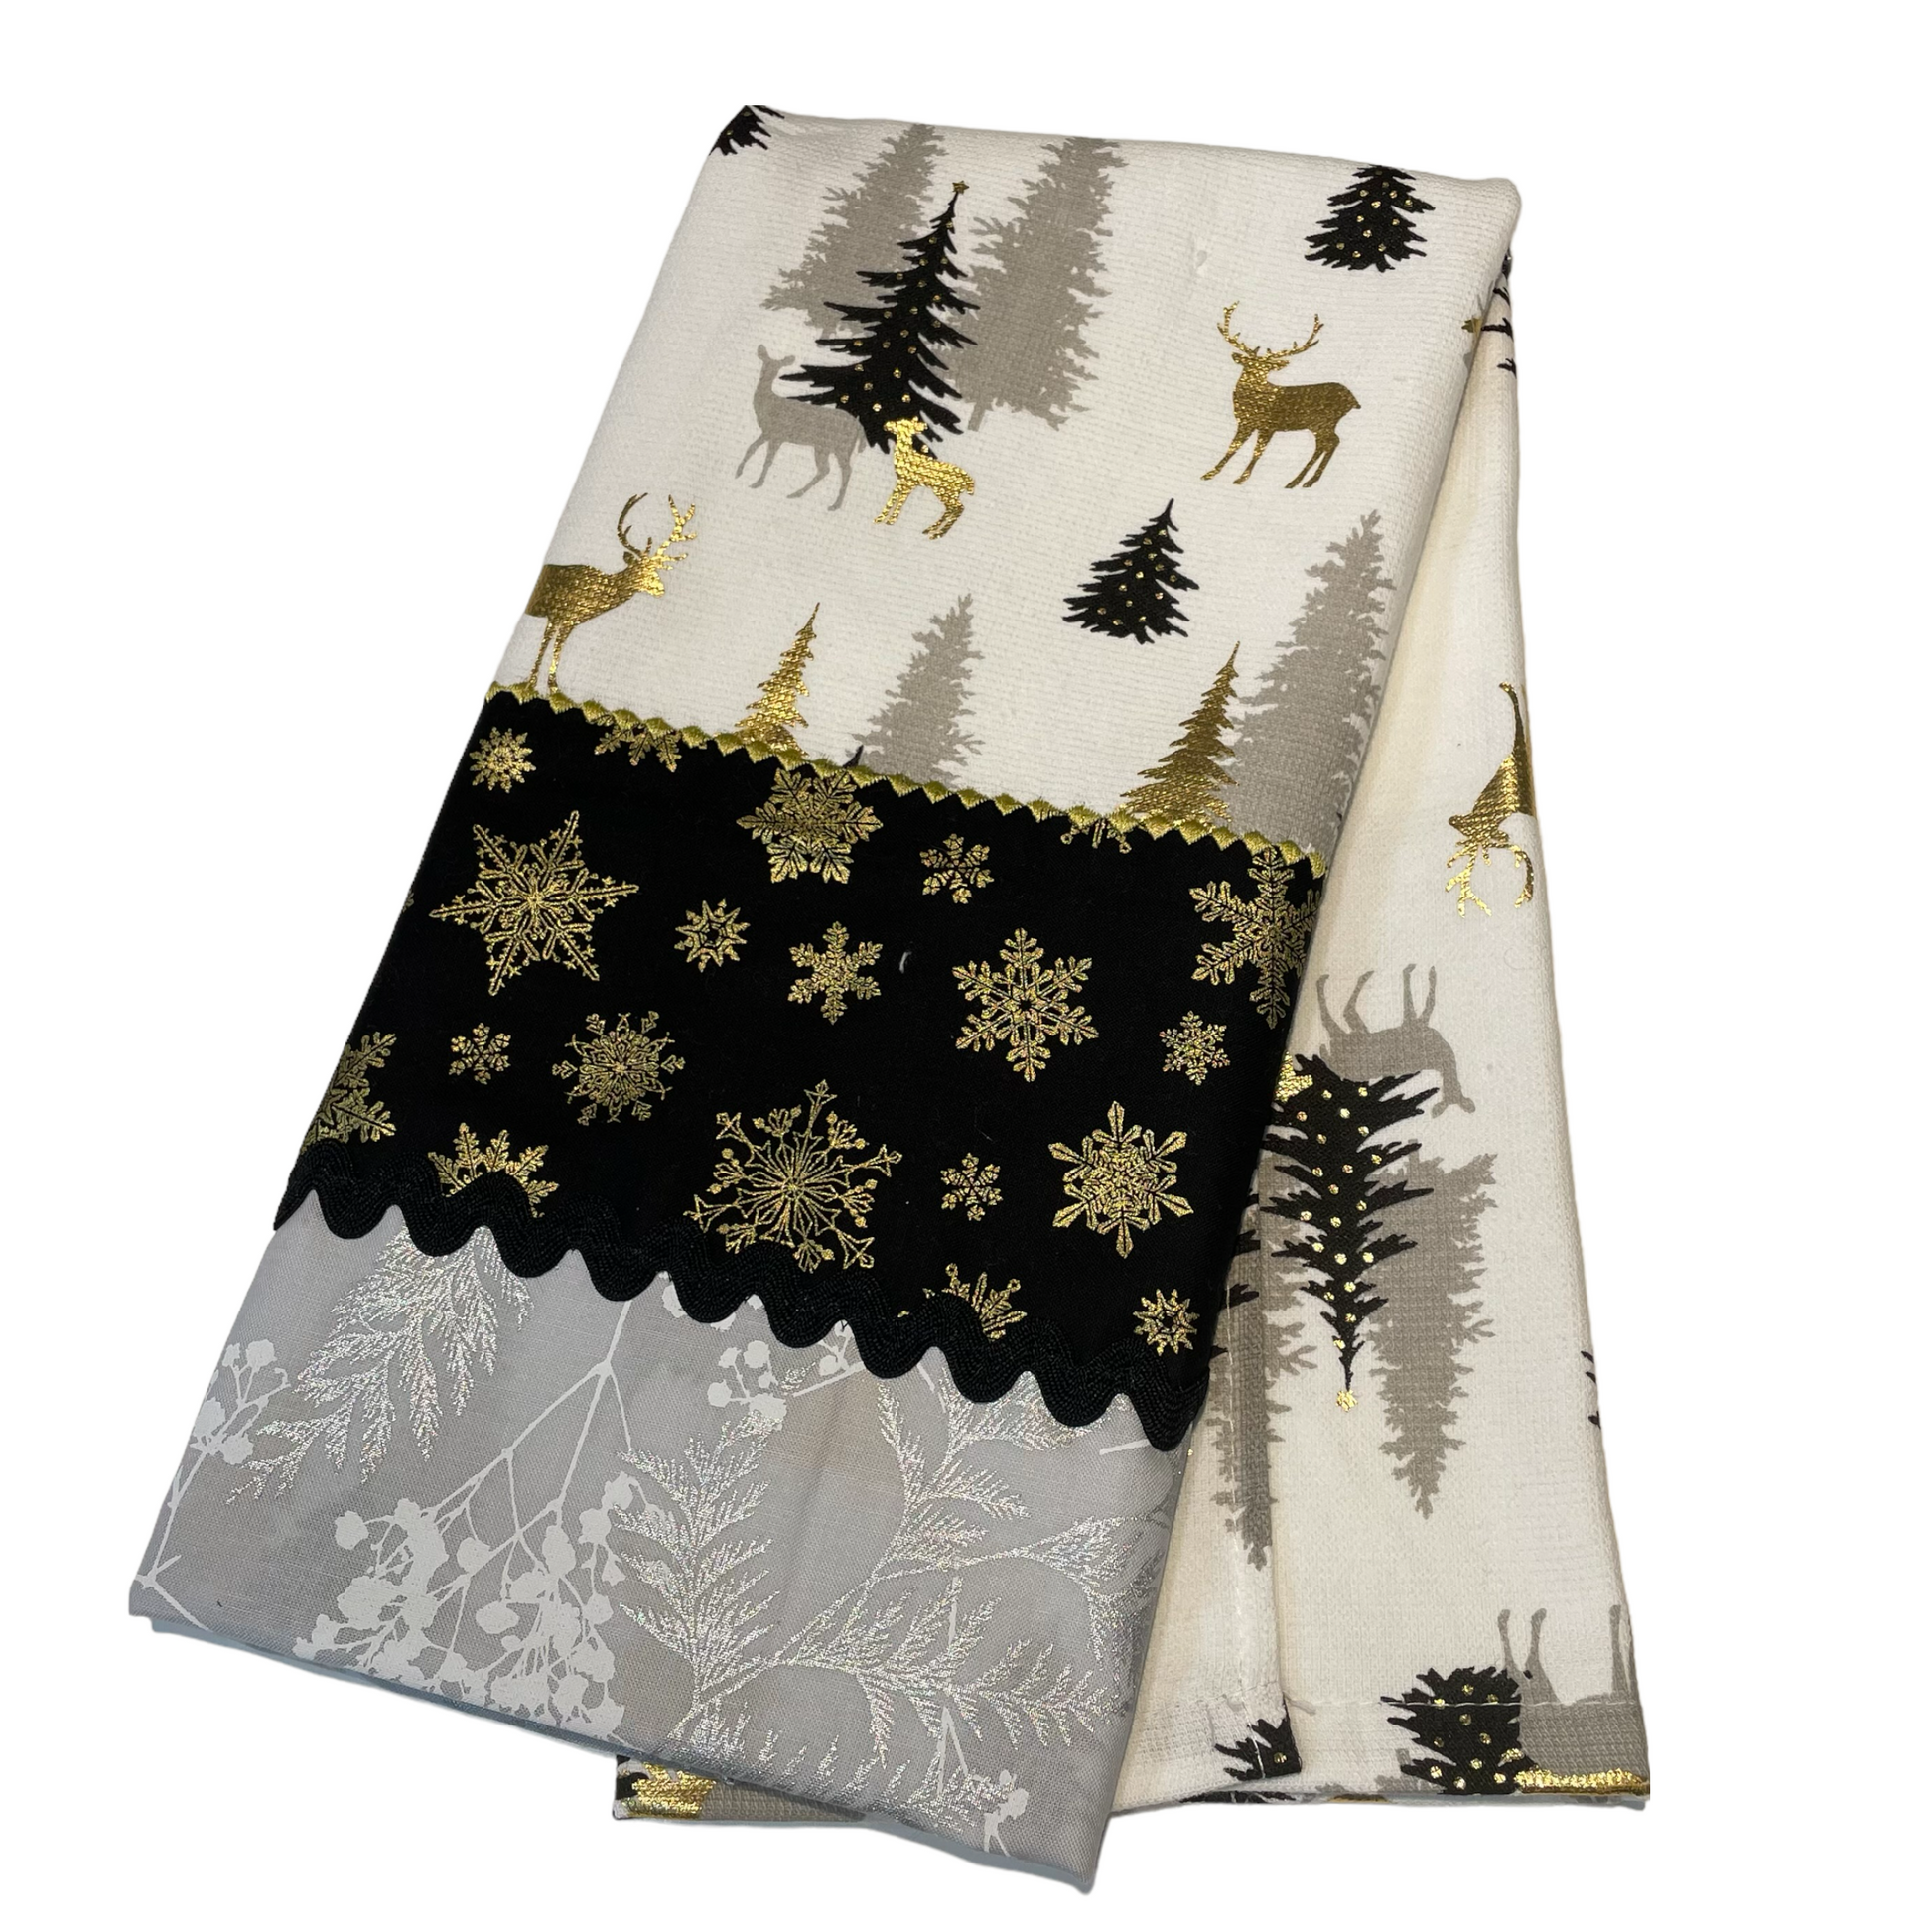 Black and Gold Christmas Dish Towel Featuring Reindeer, Christmas Trees and Snowflakes. Part of a mix and match collection of decor. Shop the look at Home Stitchery Decor and be sure to pop over to the Home Stitchery Decor YouTube Channel